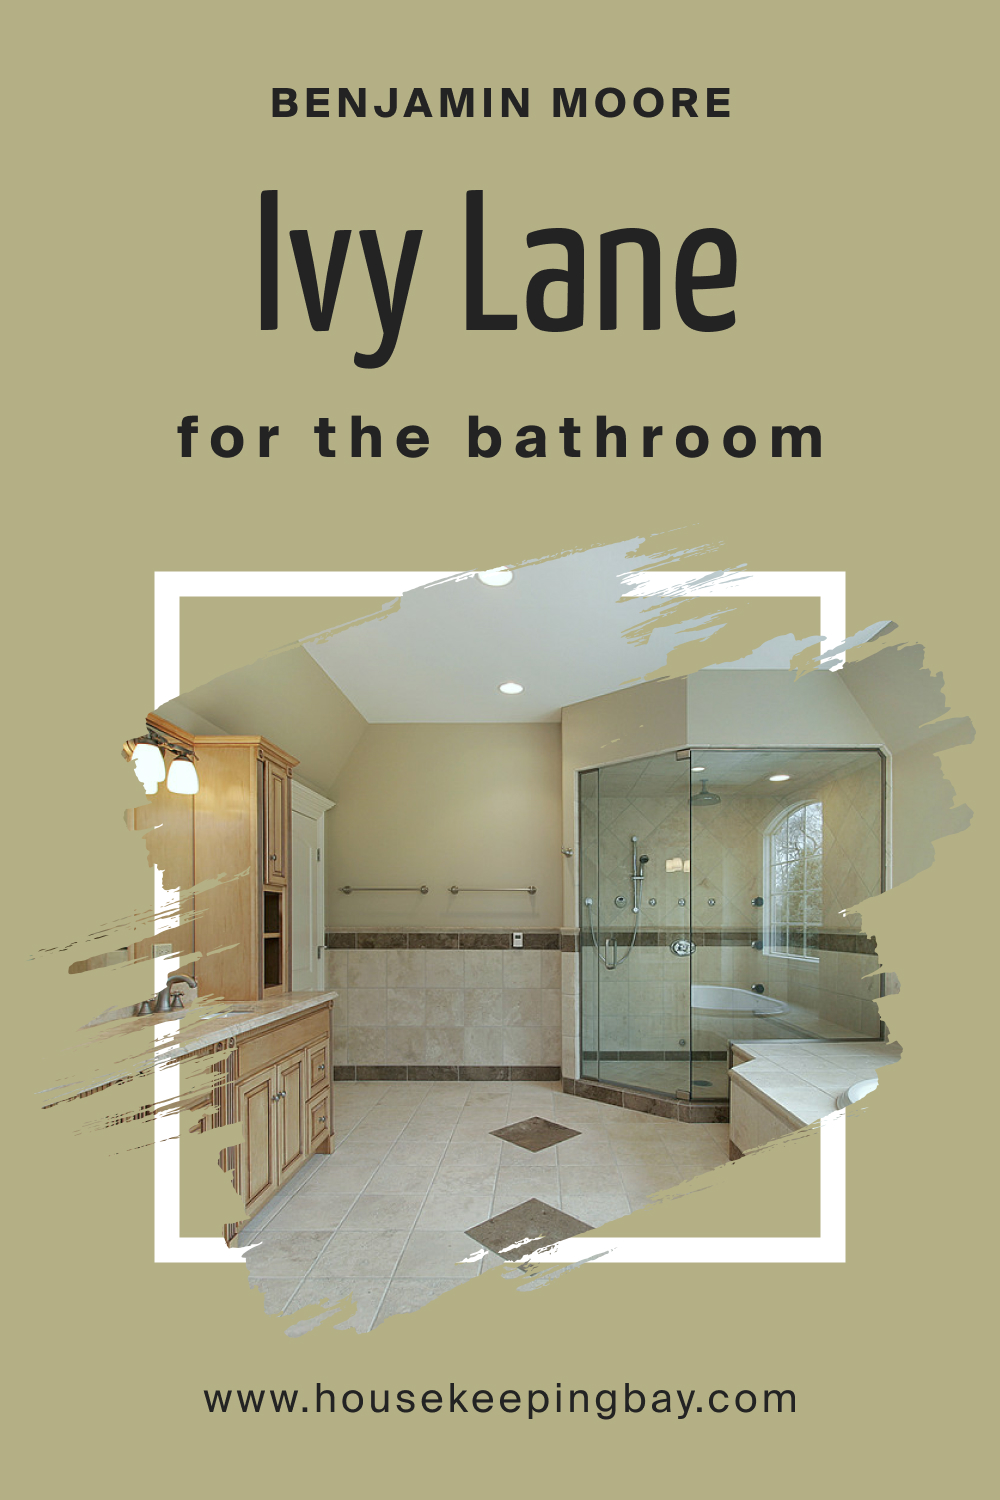 How to Use BM Ivy Lane 523 in the Bathroom?